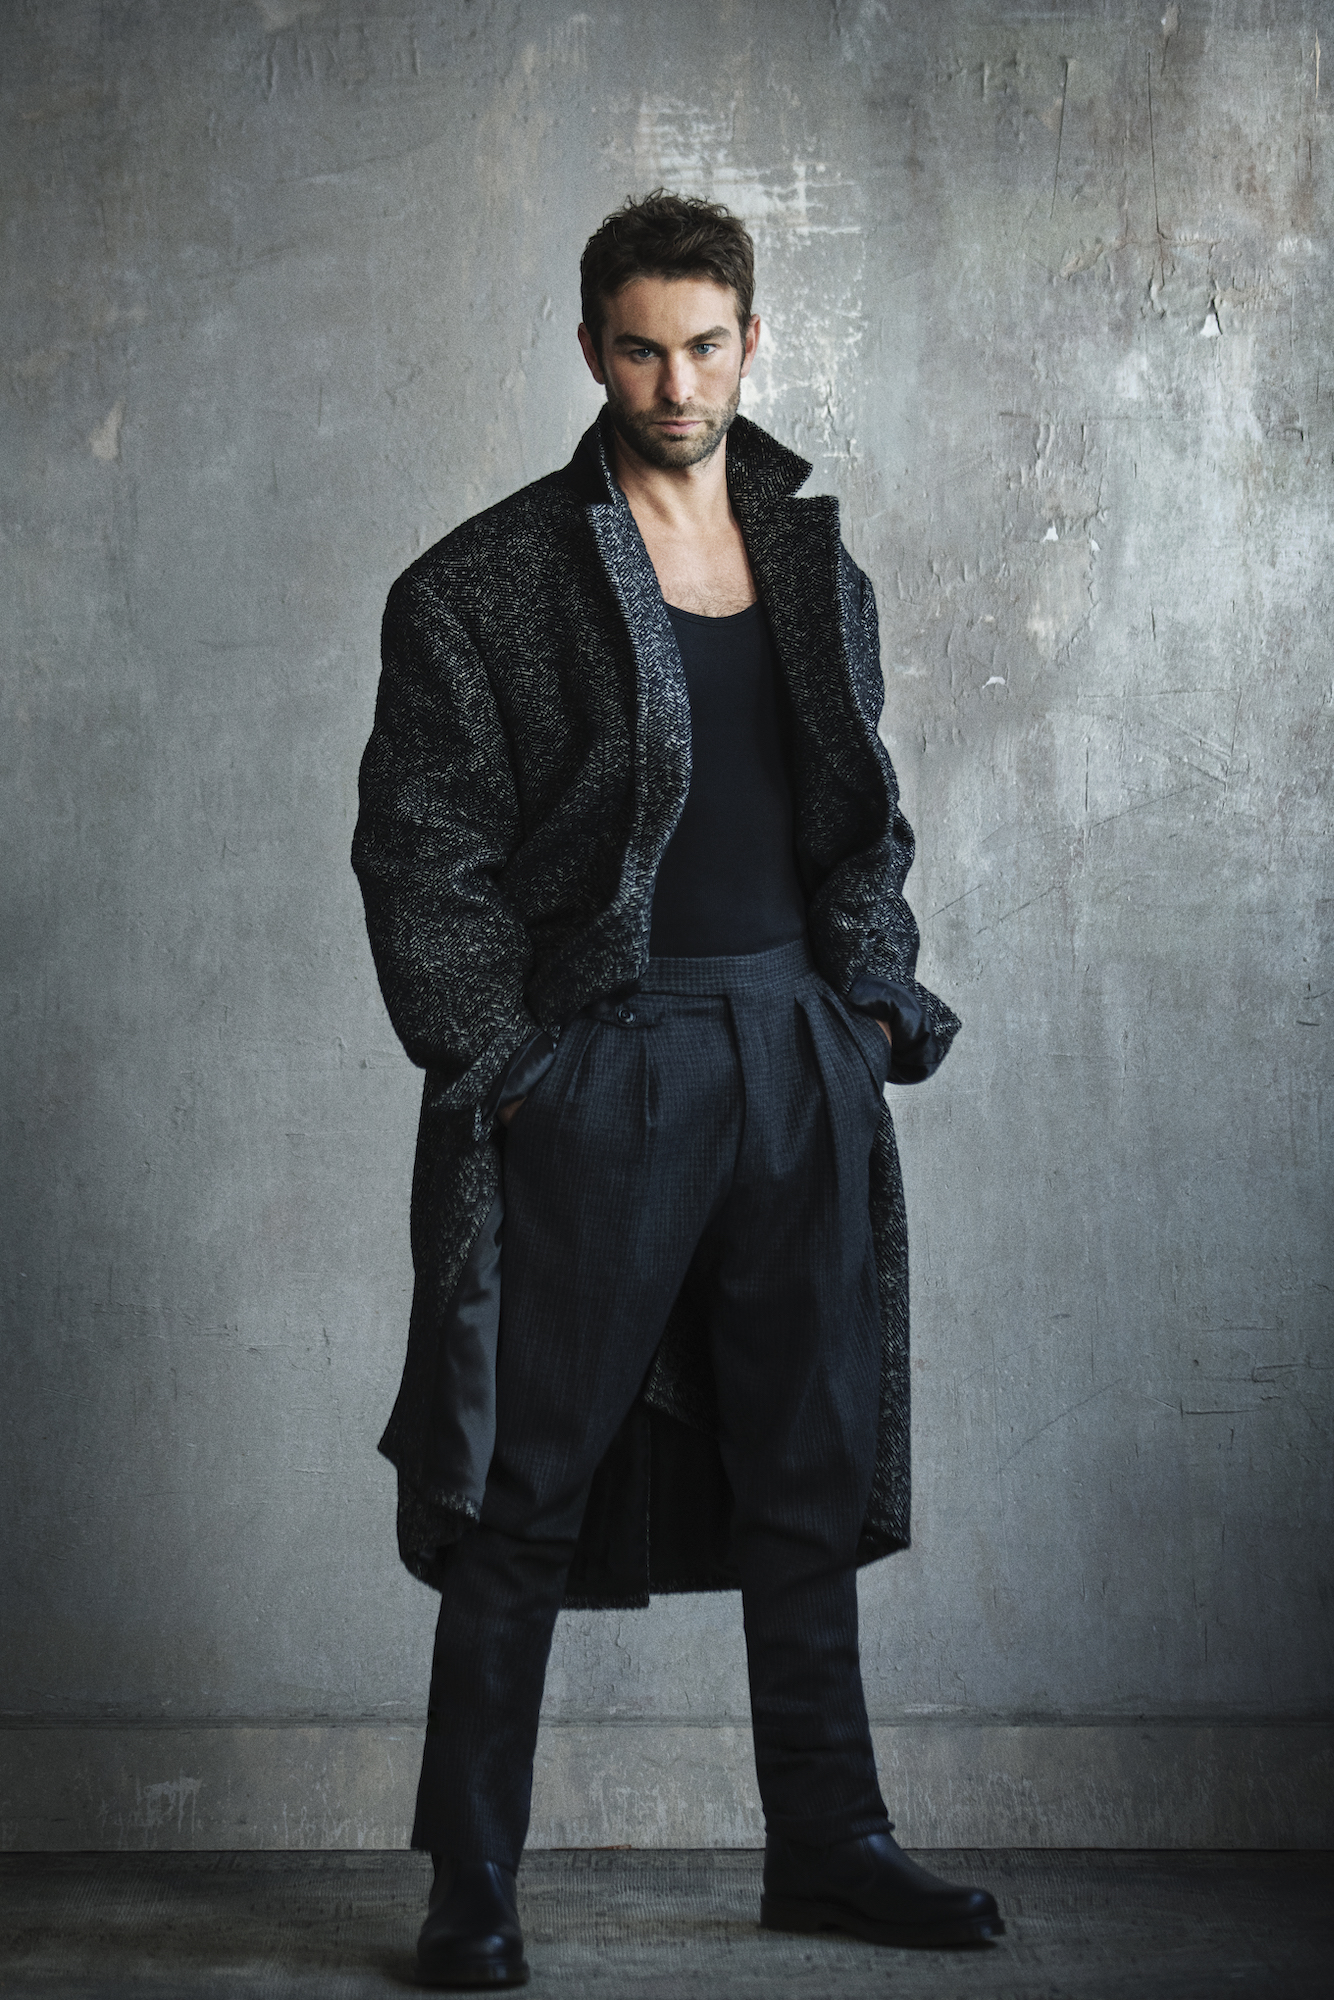  Chace wears pants Canali 1934, coat Coach, boots Dr. Martens and top stylist’s own.